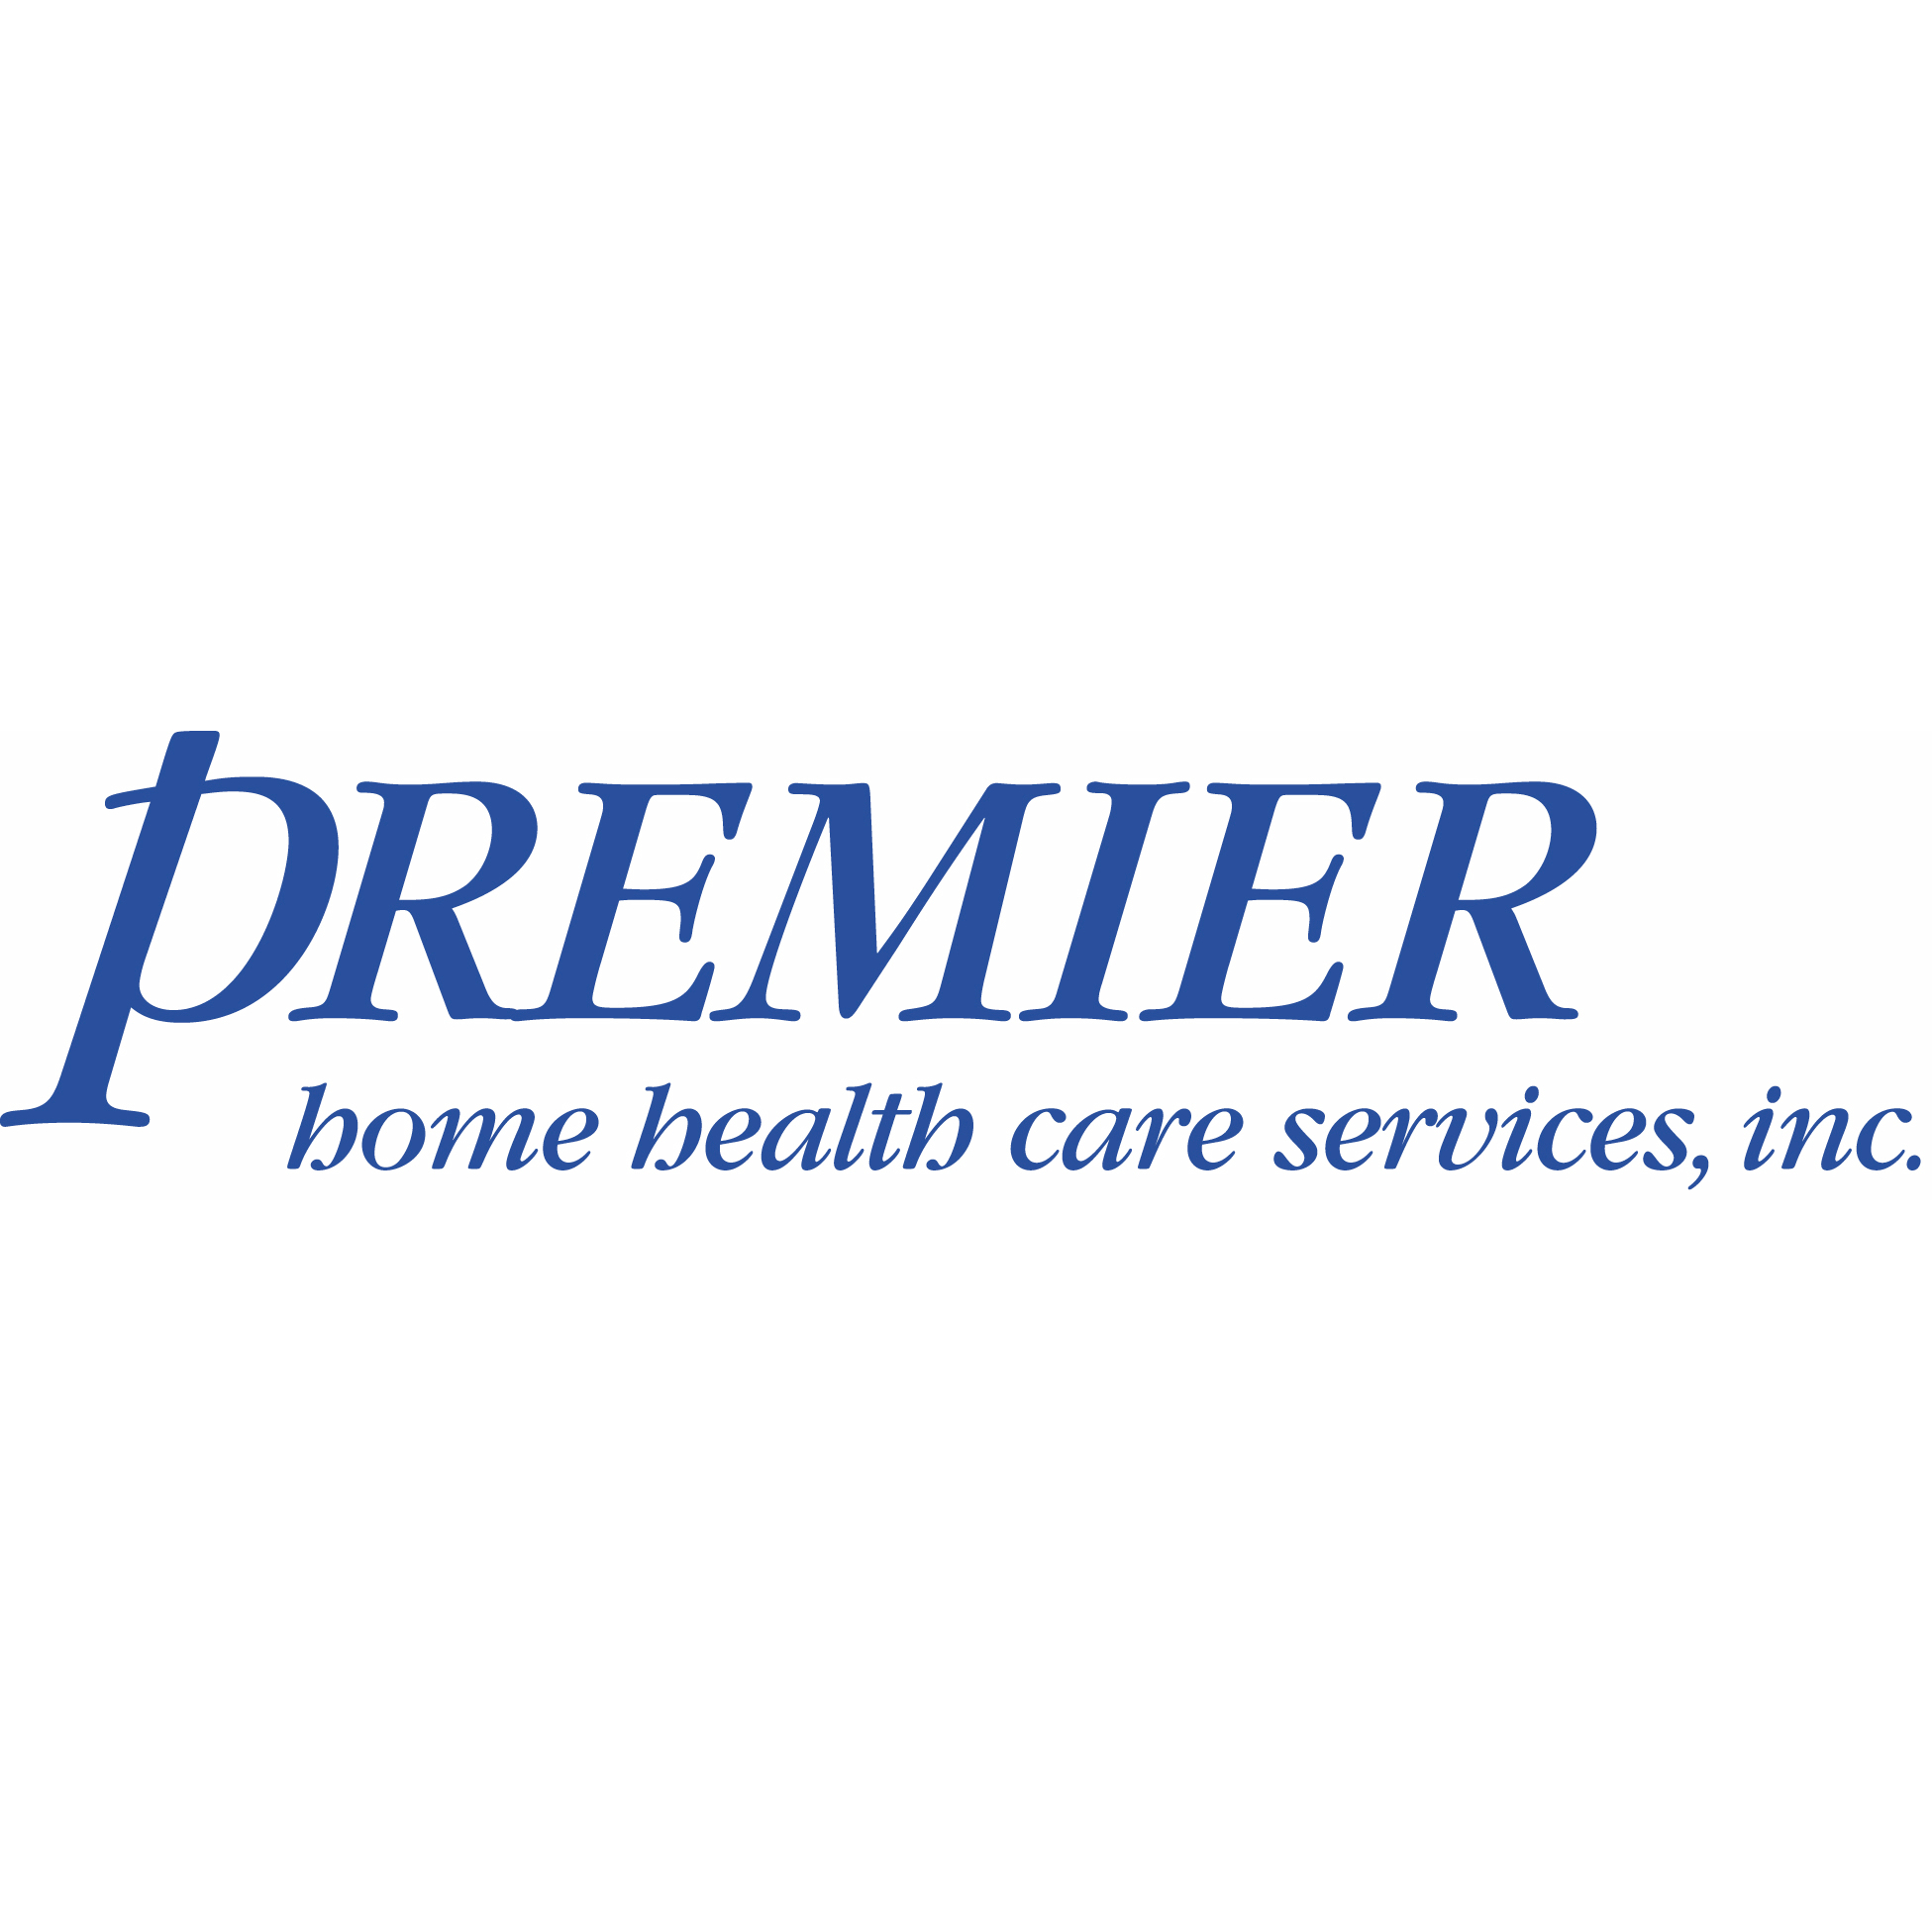 Premier Home Health Care Services, Inc. Coupons near me in New York, NY 10004 | 8coupons